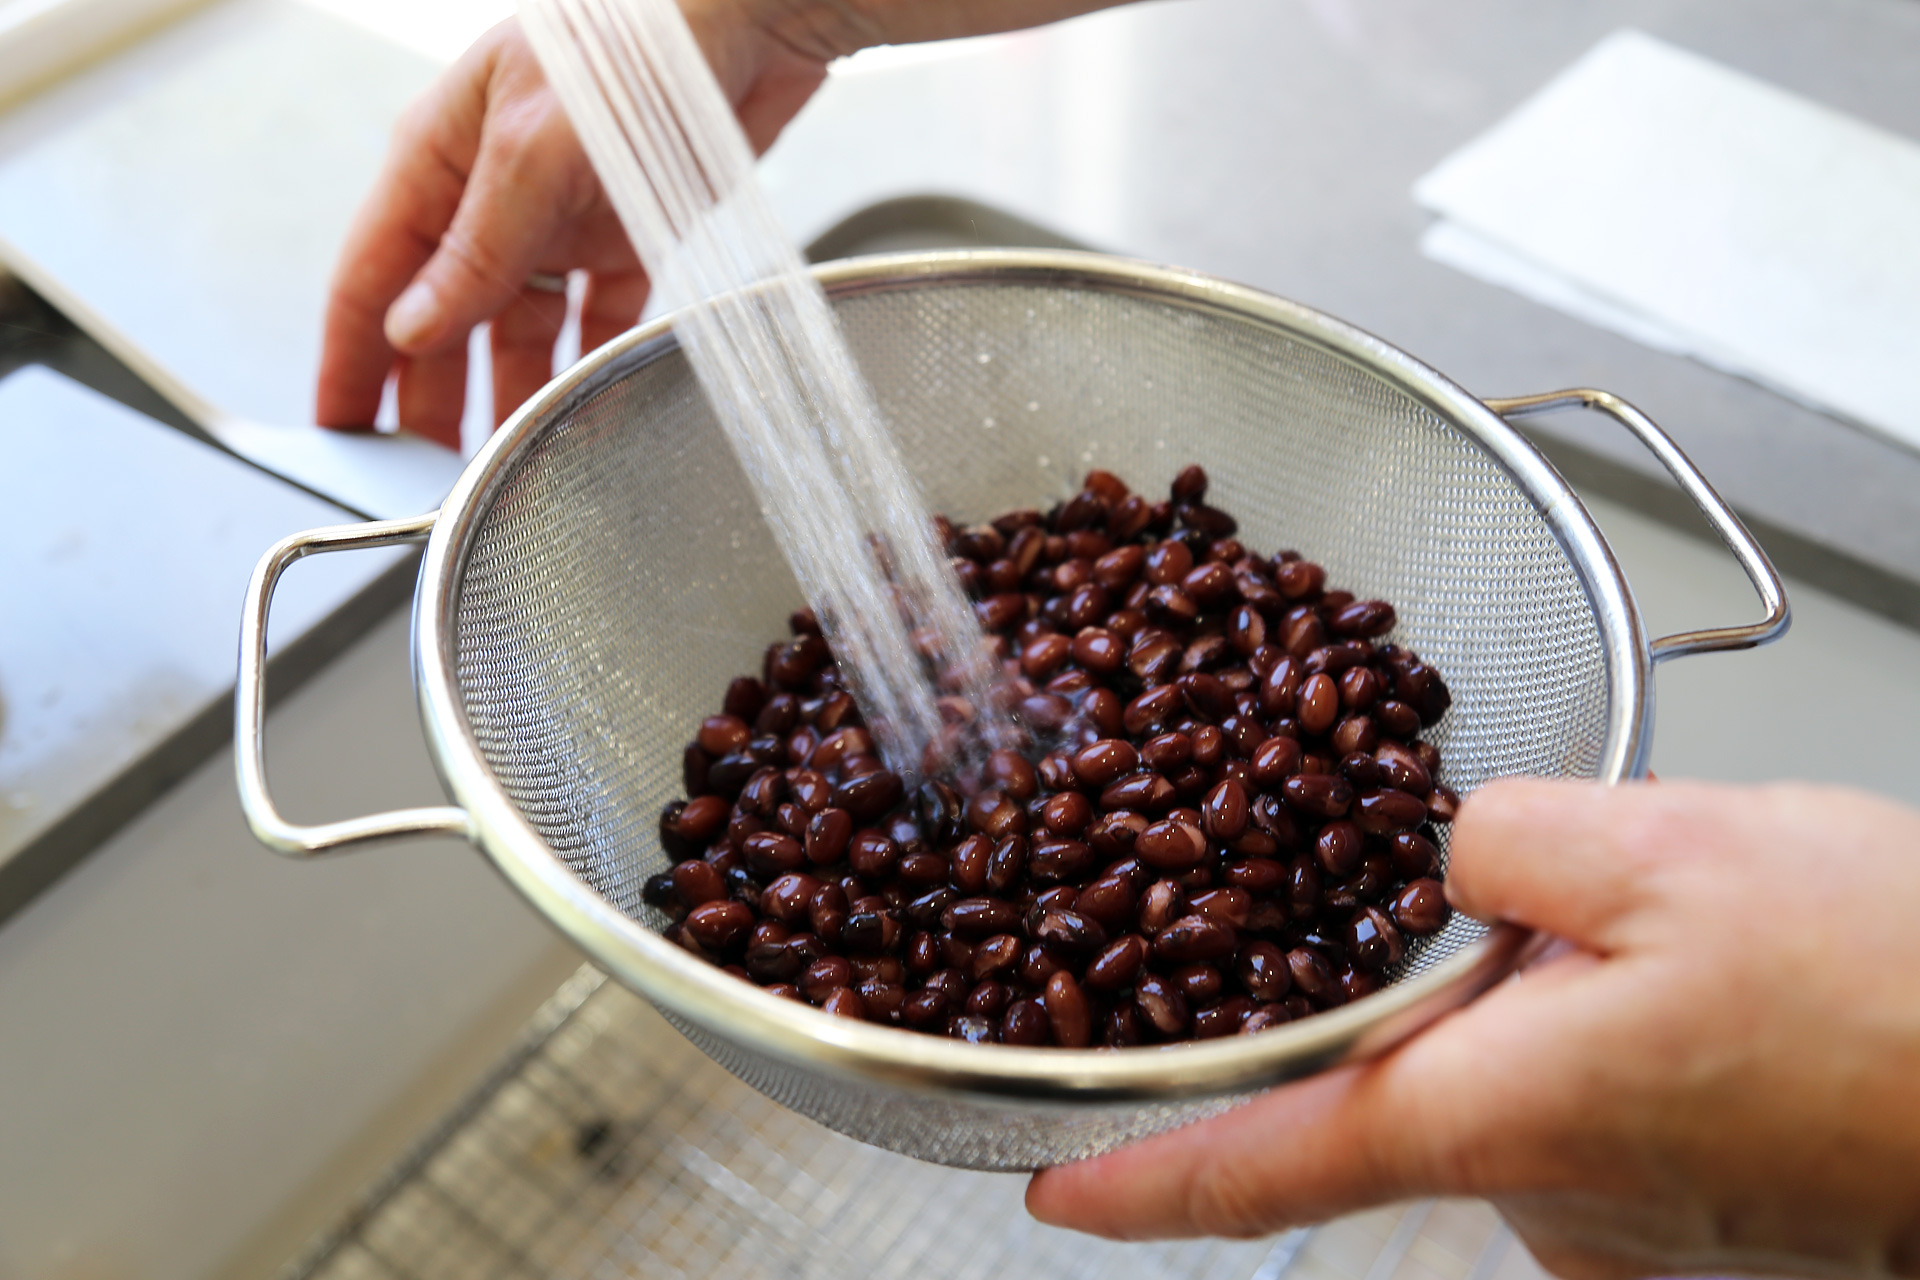 Drain and rinse canned organic black beans.